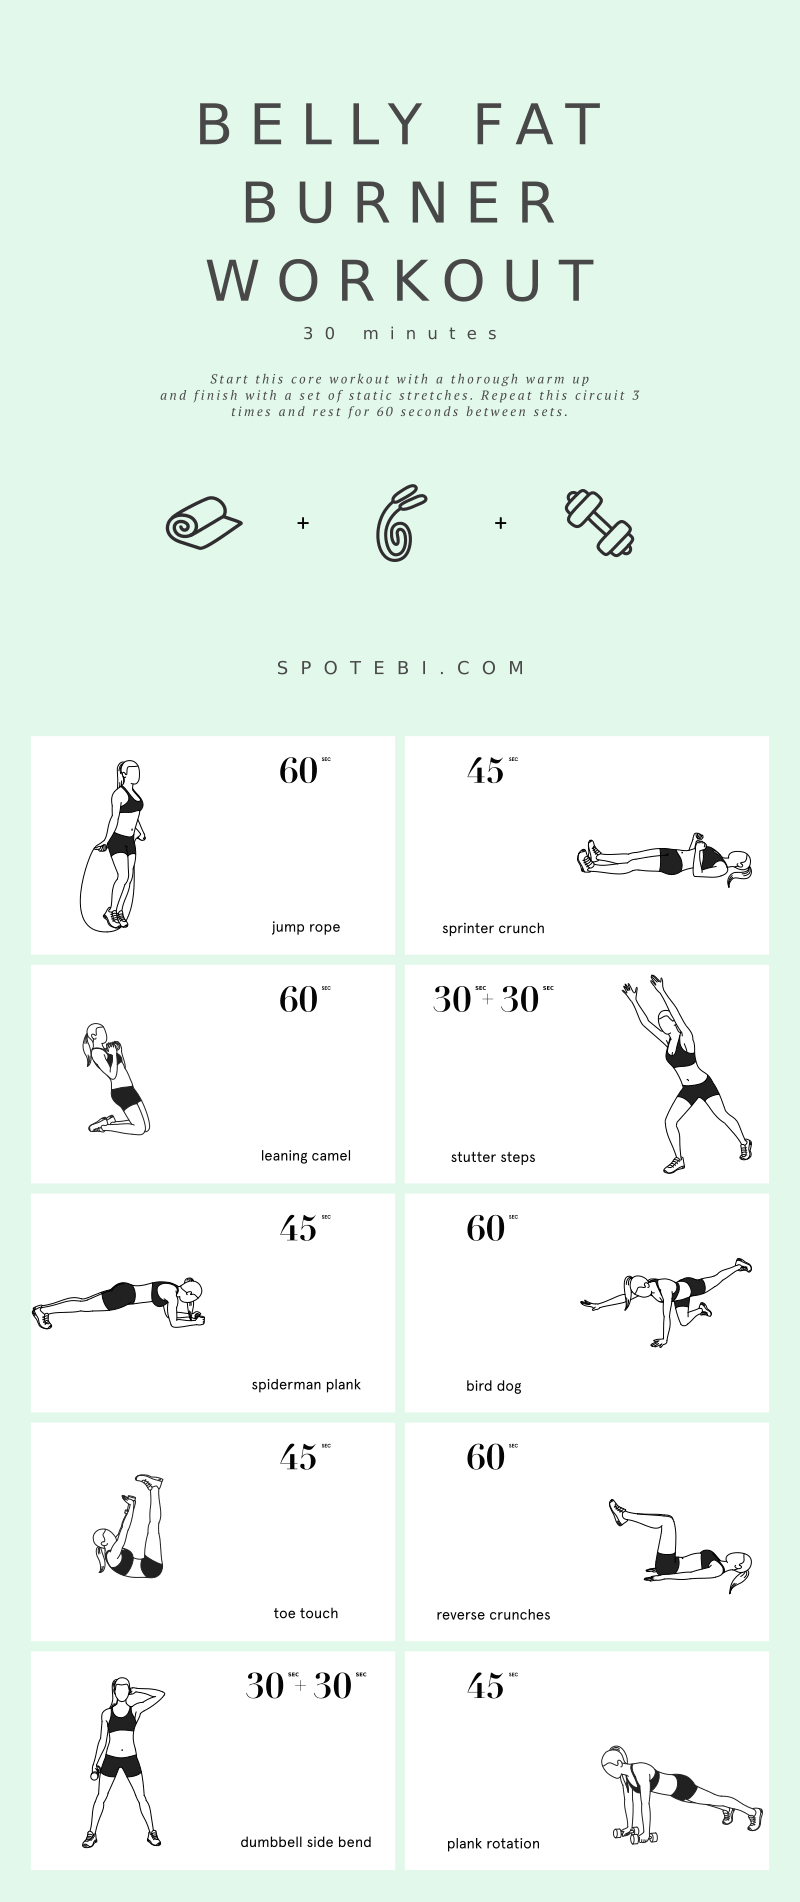 Flatten your abs and blast calories with these 10 moves! A belly fat burner workout to tone up your tummy, strengthen your core, and get rid of love handles. Keep to this routine and get the flat, firm belly you always wanted! https://www.spotebi.com/workout-routines/belly-fat-burner-workout-for-women/